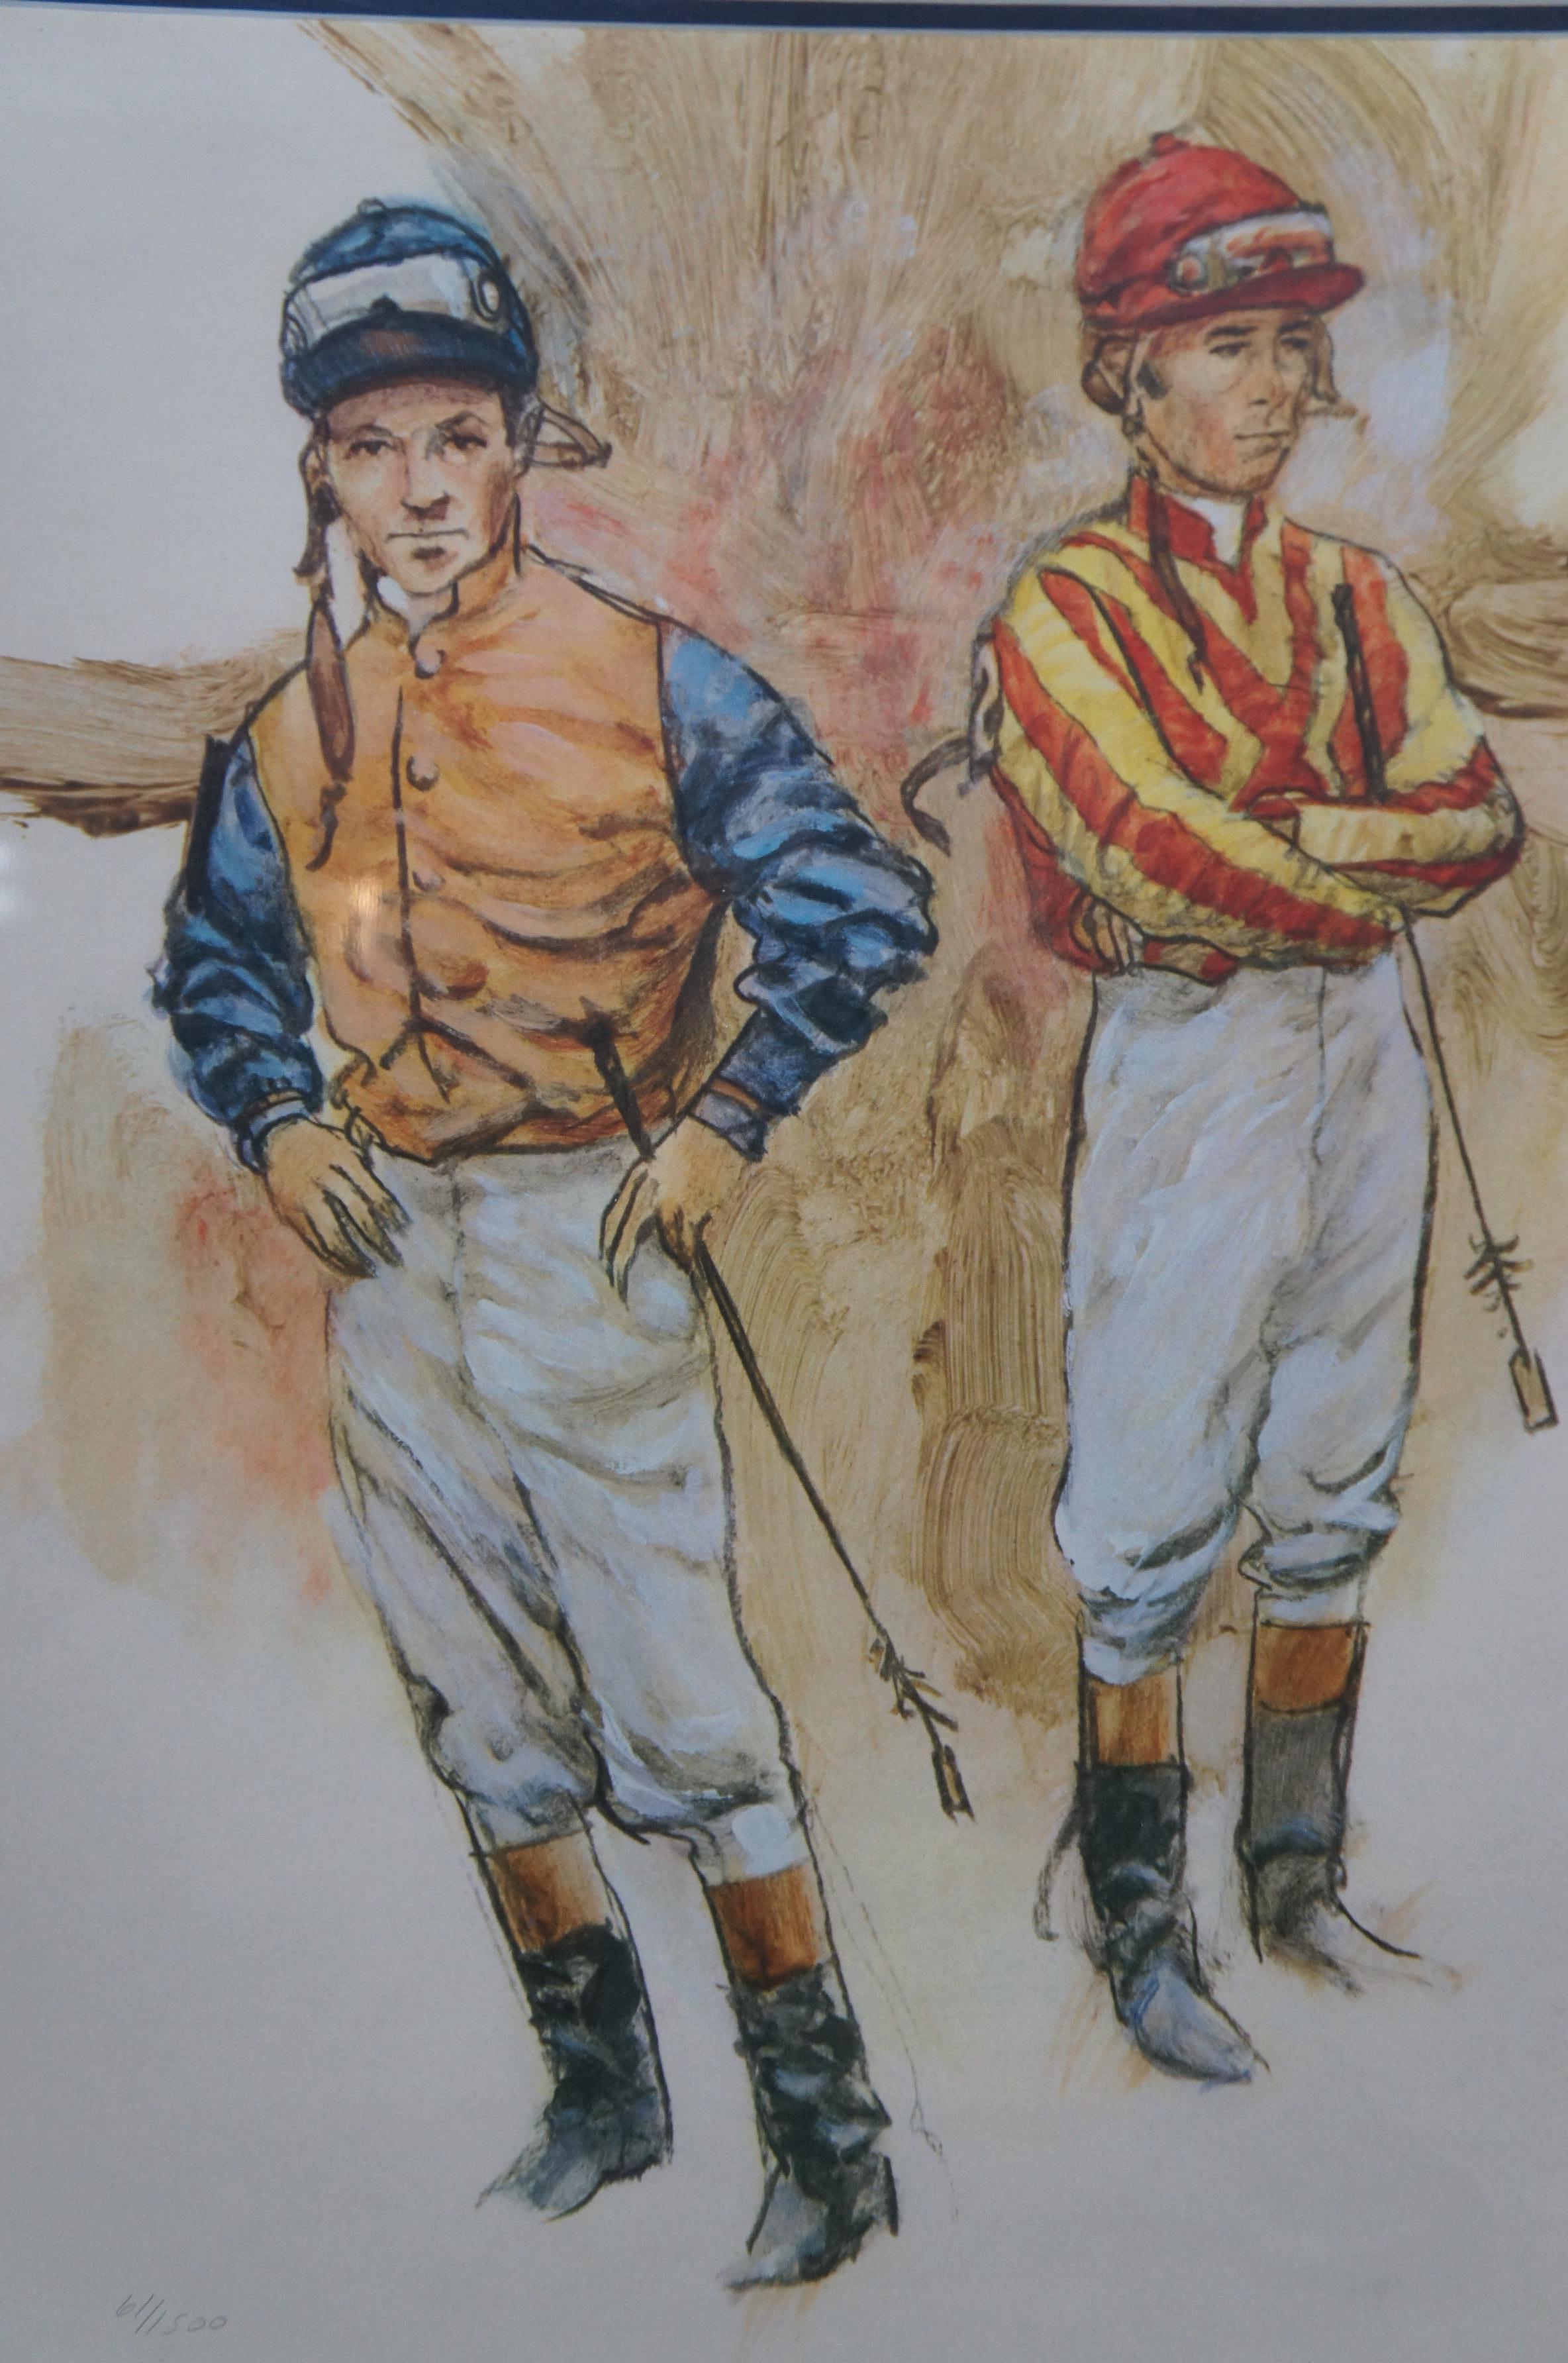 2 Vintage Henry Koehler Signed Offset Lithographs Equestrian Jockey Horse Racing In Good Condition For Sale In Dayton, OH